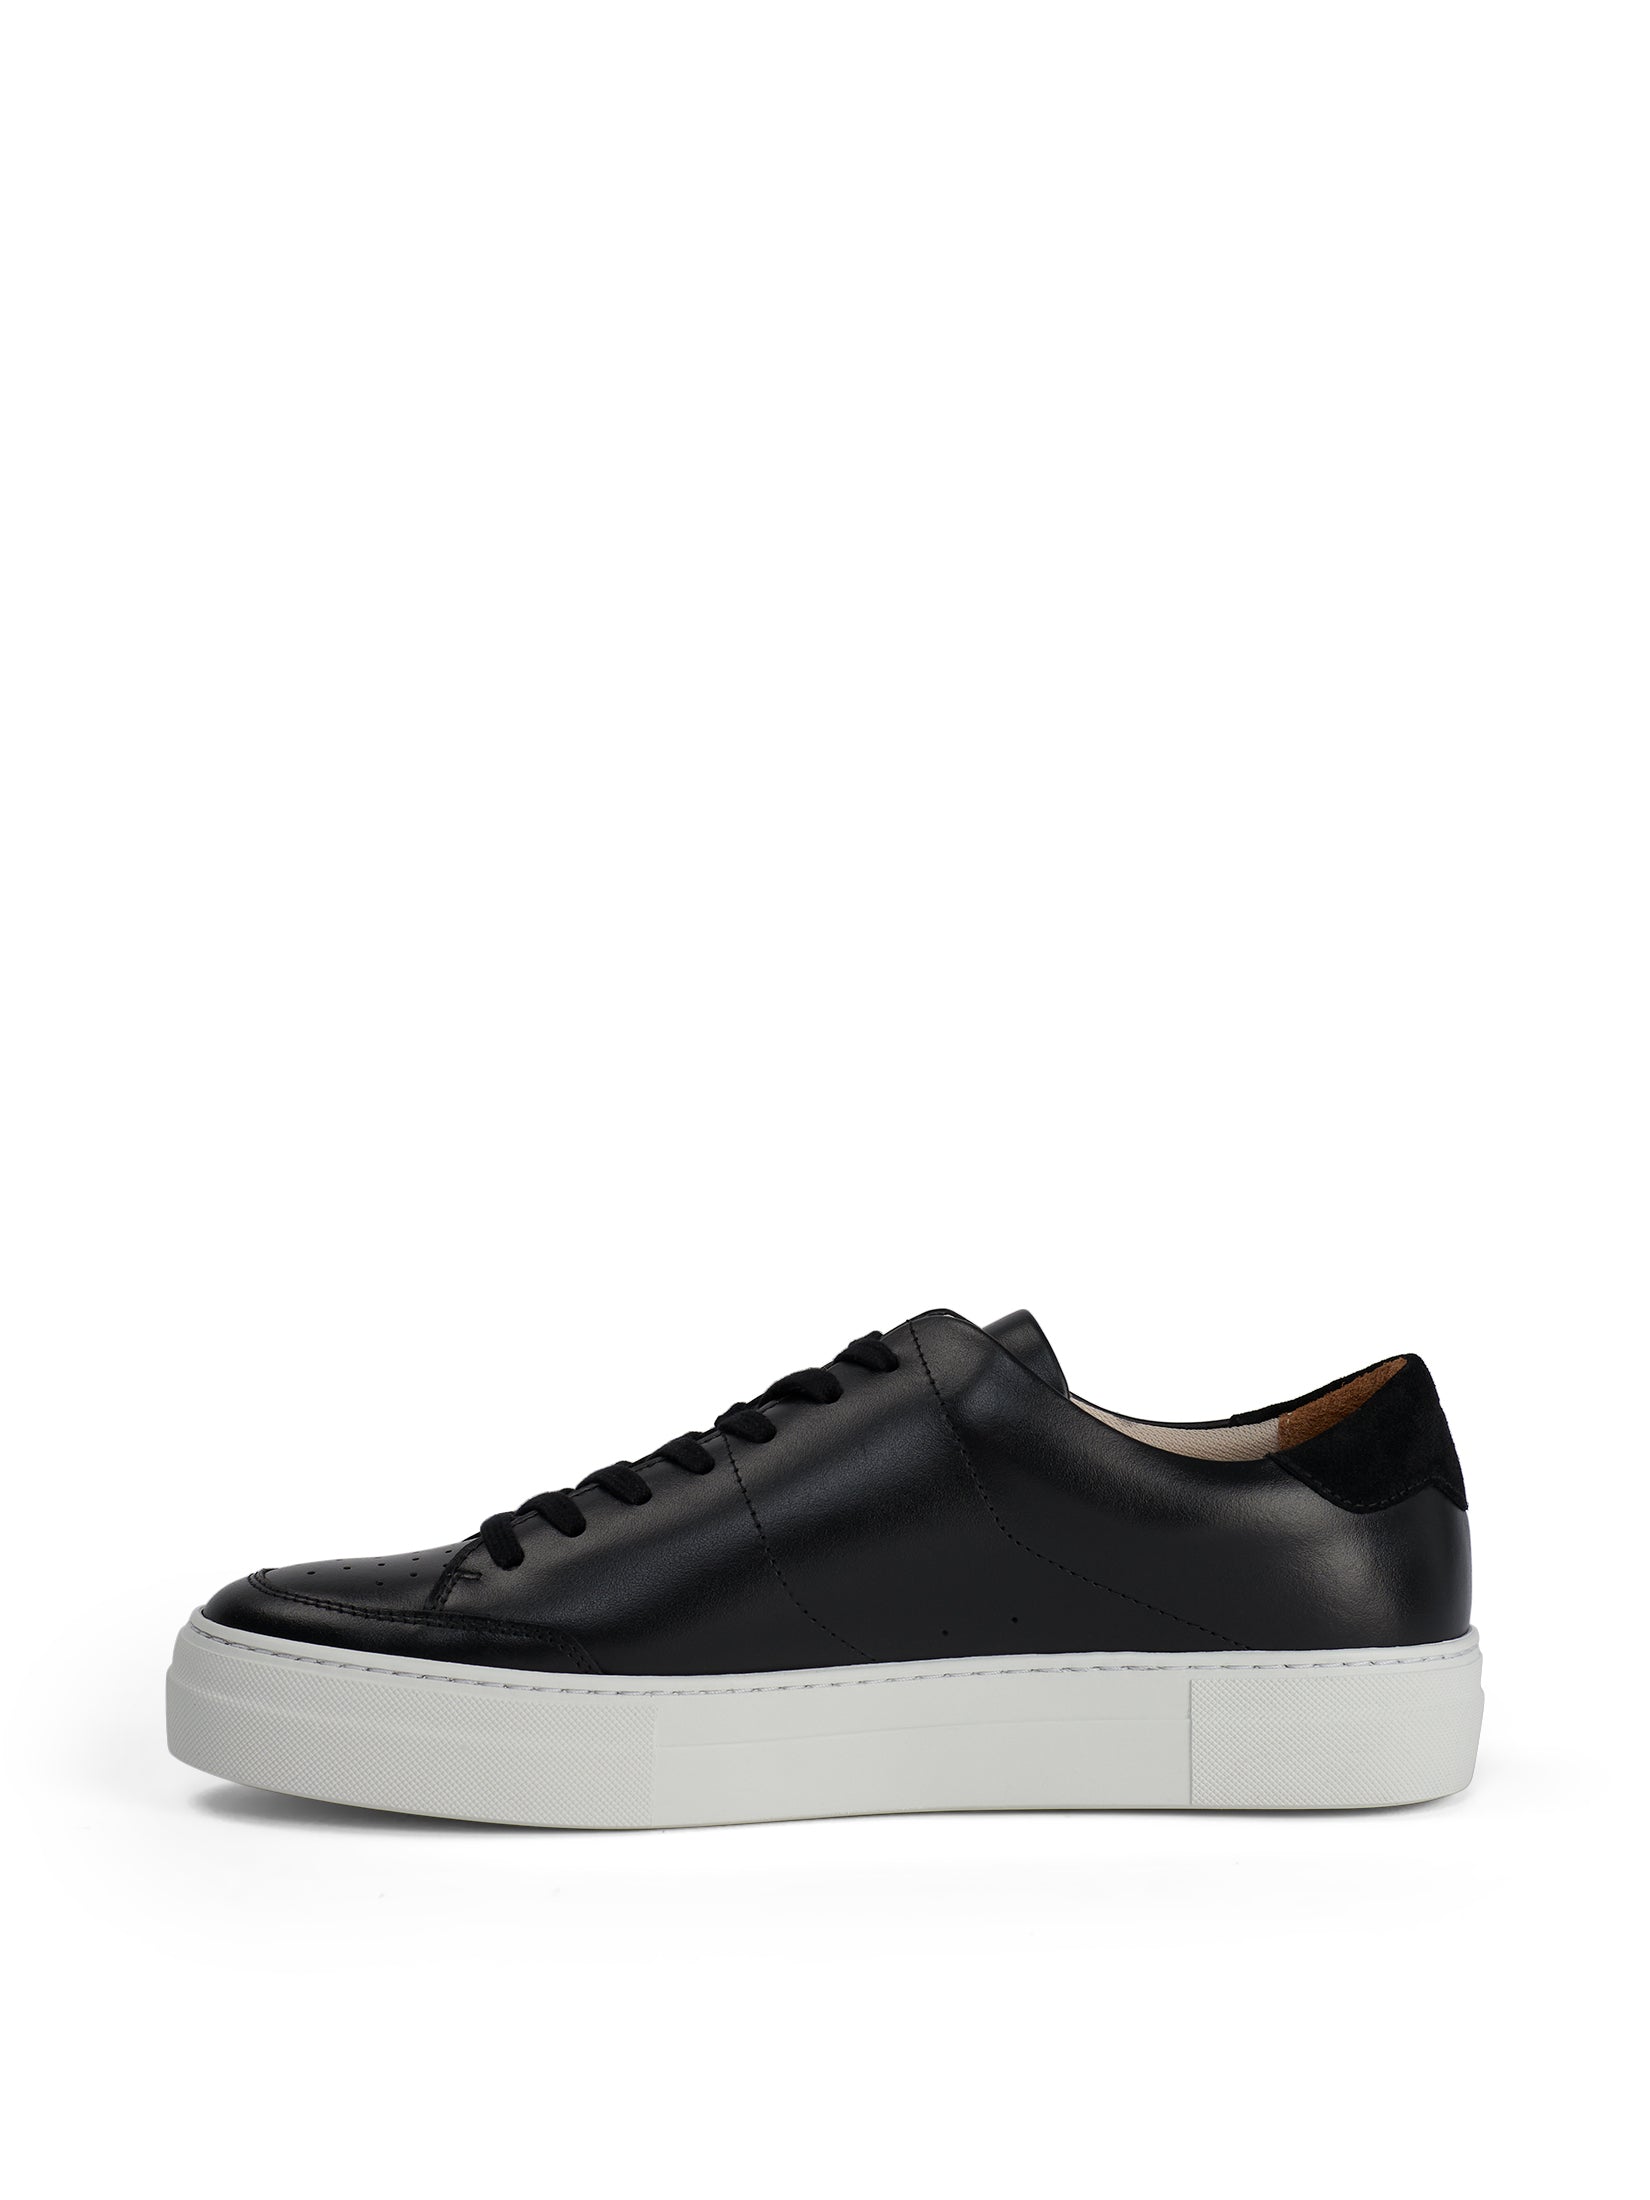 J.LINDEBERG Art Signature Leather Sneakers